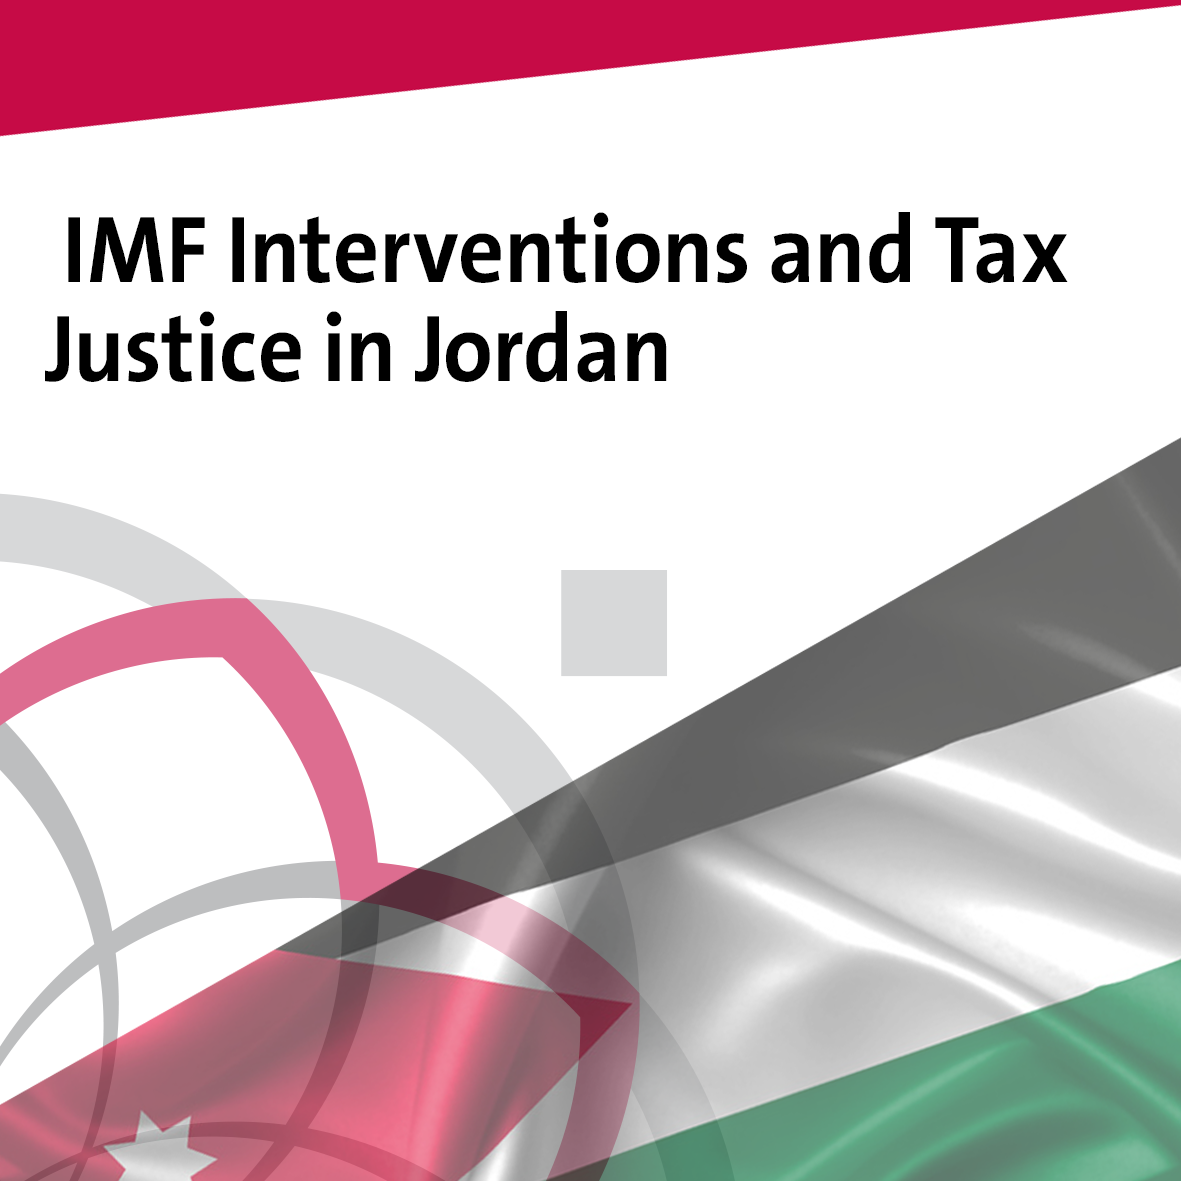 IMF Interventions and Tax Justice in Jordan